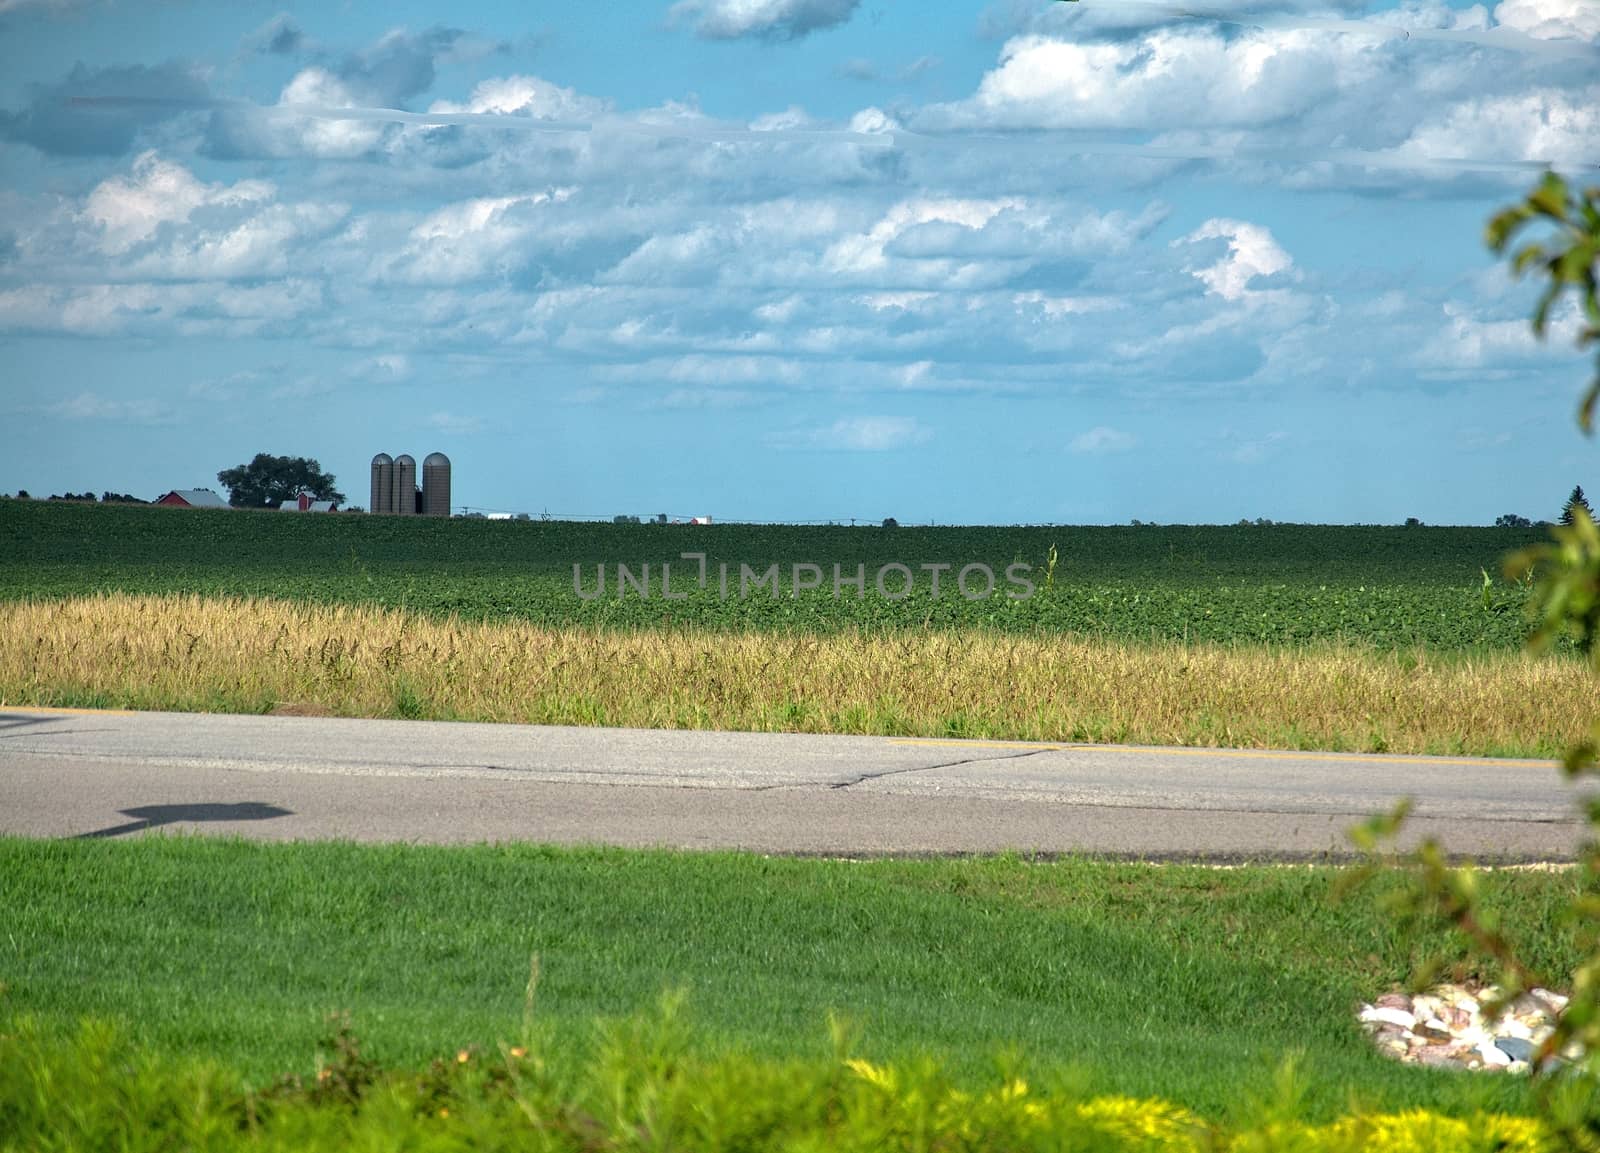 This is a farm field with silos and soybeans on a bright day.